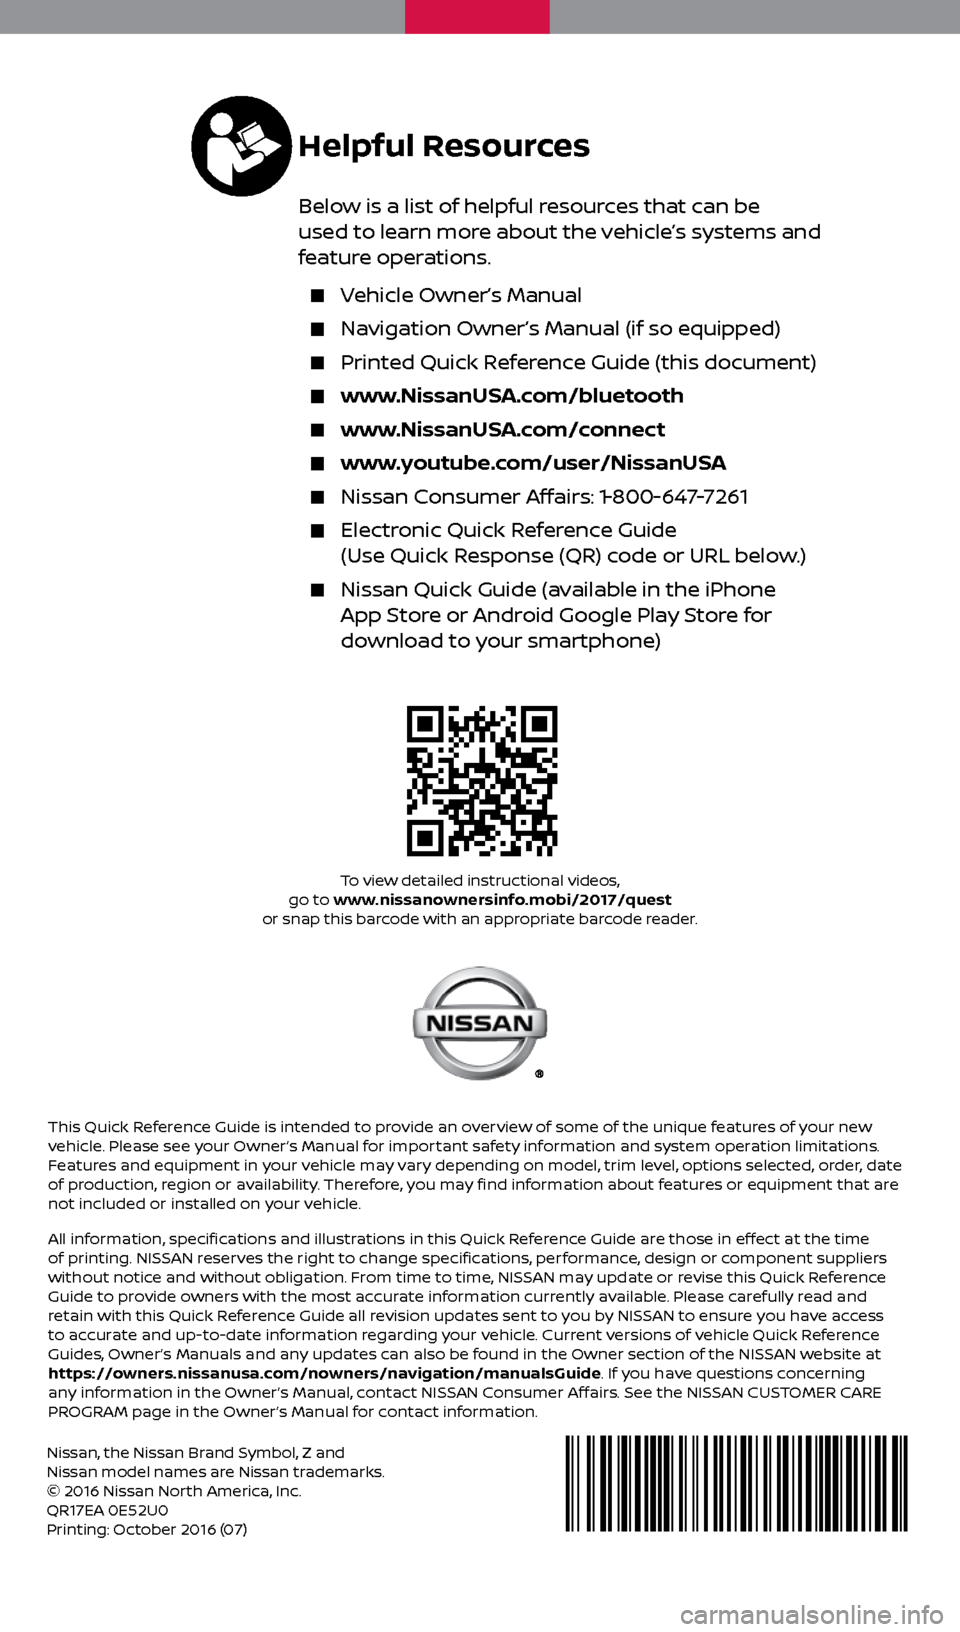 NISSAN QUEST 2017 RE52 / 4.G Quick Reference Guide Nissan, the Nissan Brand Symbol, Z and 
Nissan model names are Nissan trademarks.
© 2016 Nissan North America, Inc.
QR17EA 0E52U0
Printing: October 2016 (07)To view detailed instructional videos, 
go